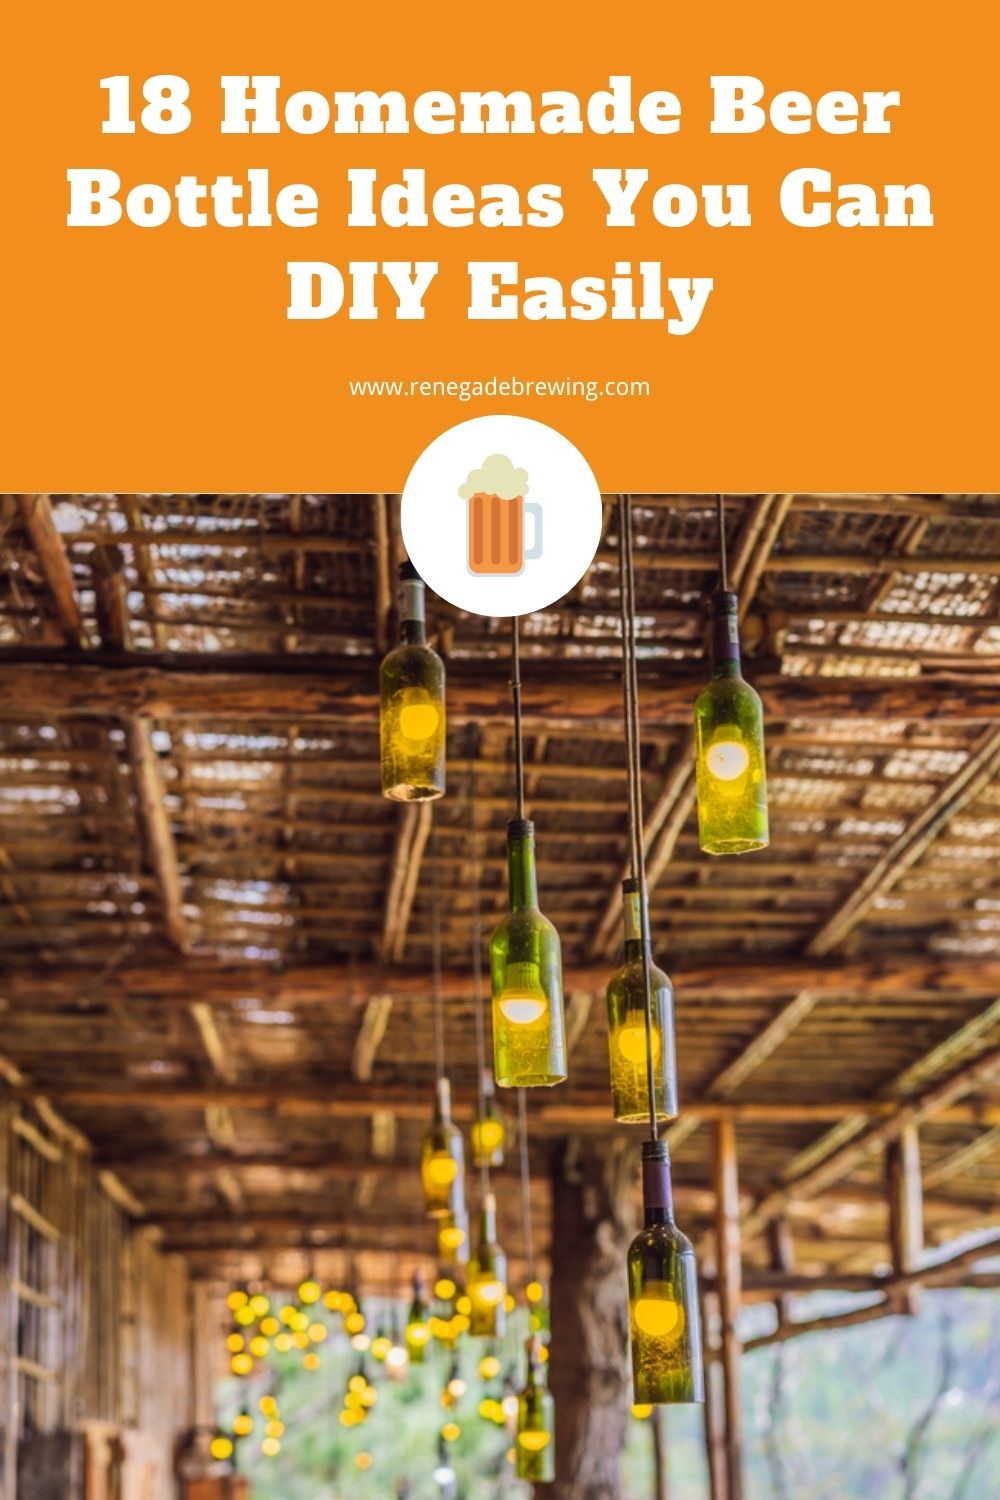 18 Homemade Beer Bottle Ideas You Can DIY Easily 1